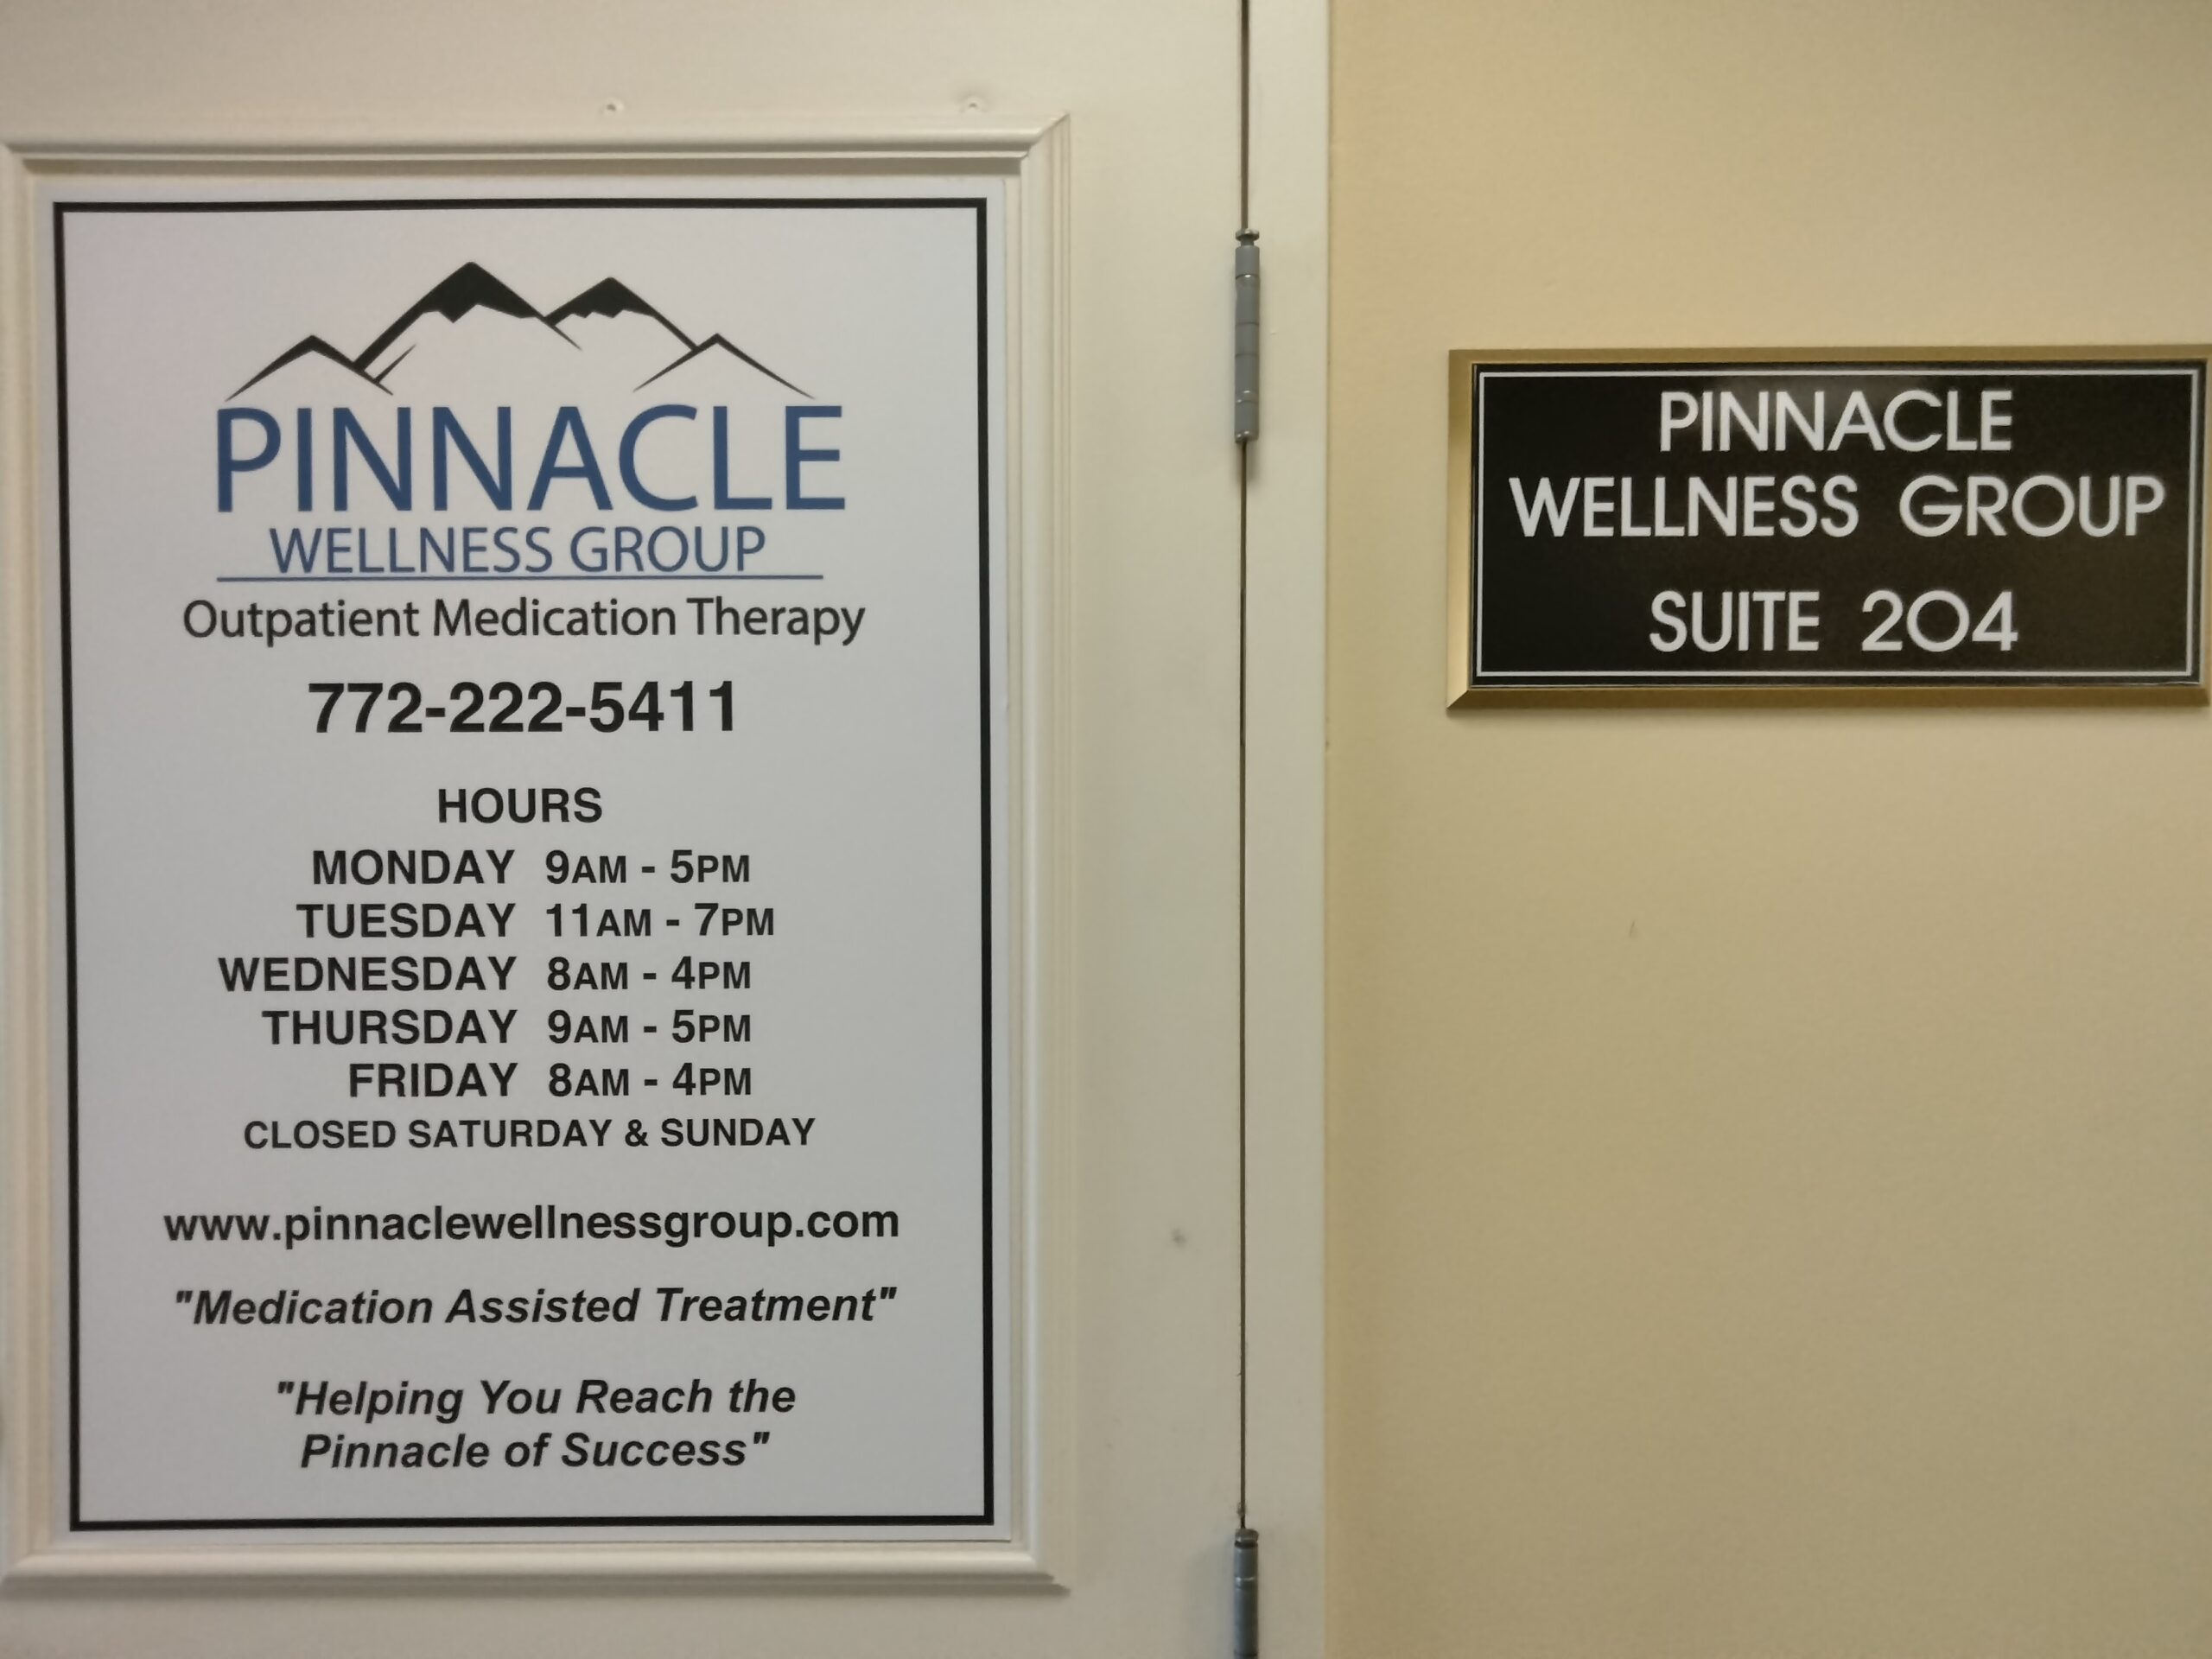 A graphic of the contact information and hours for Pinnacle Wellness Group on their front door entrance